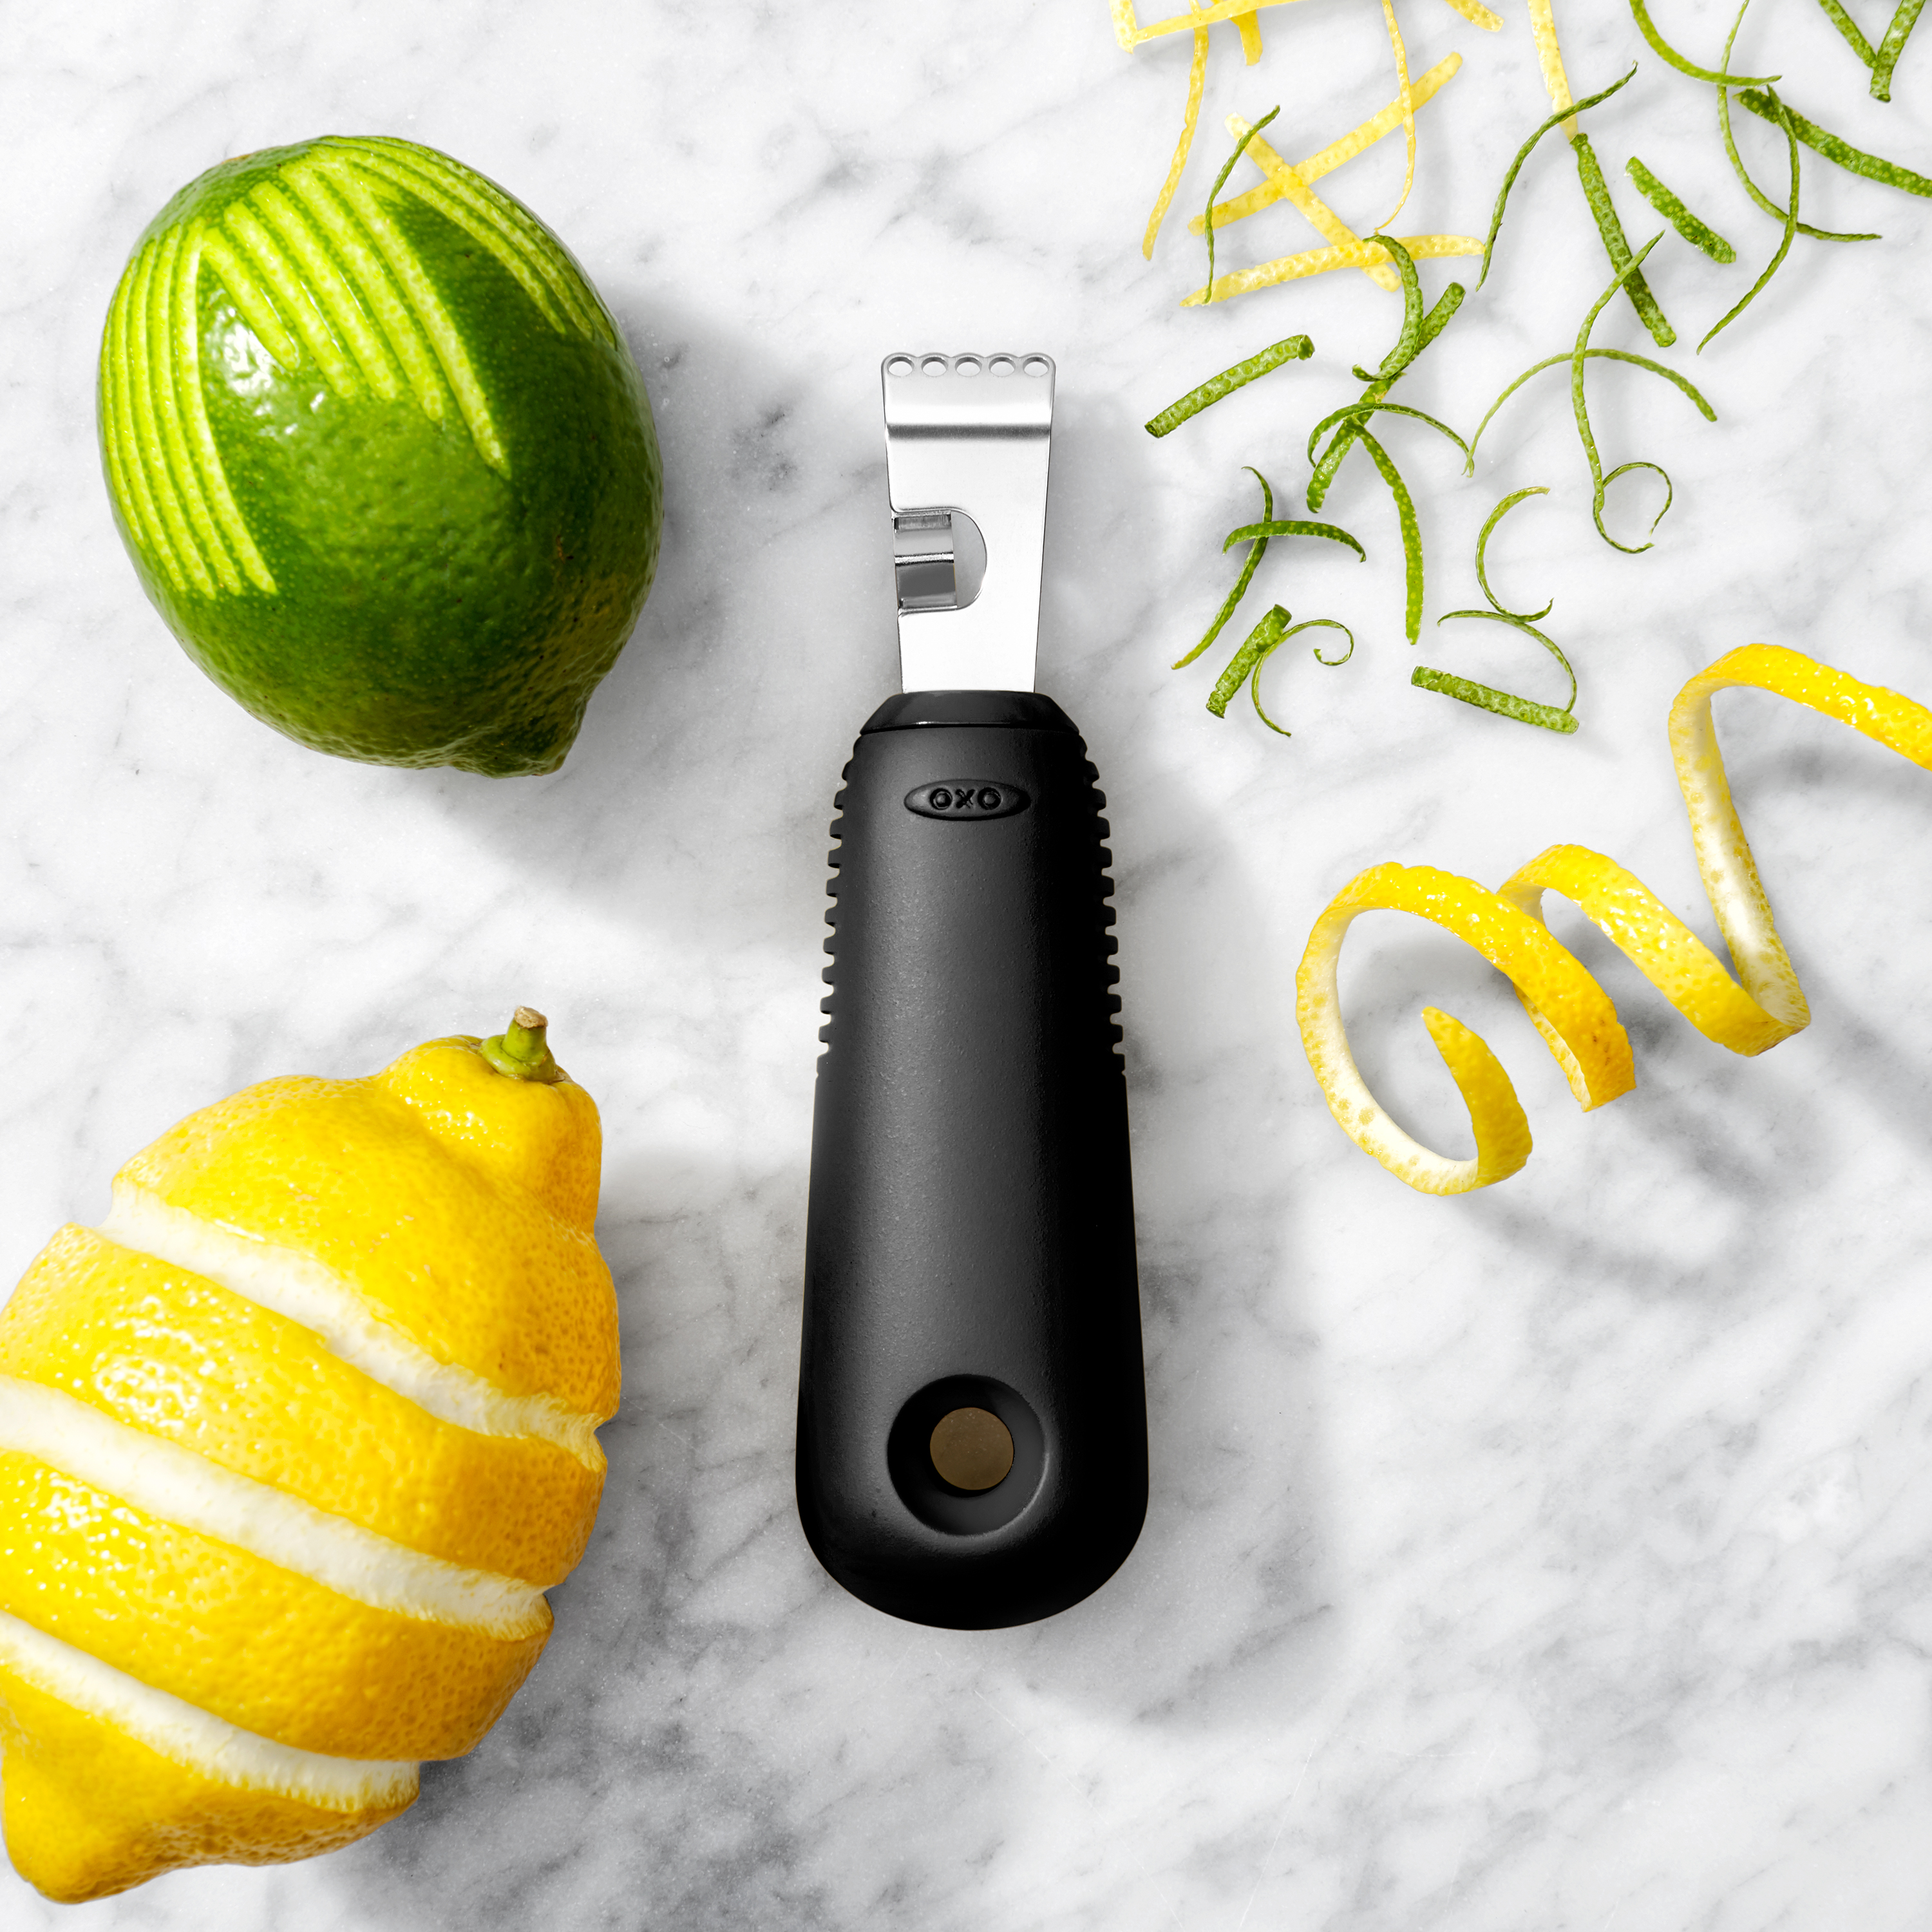 Williams Sonoma OXO Citrus Zester with Channel Knife